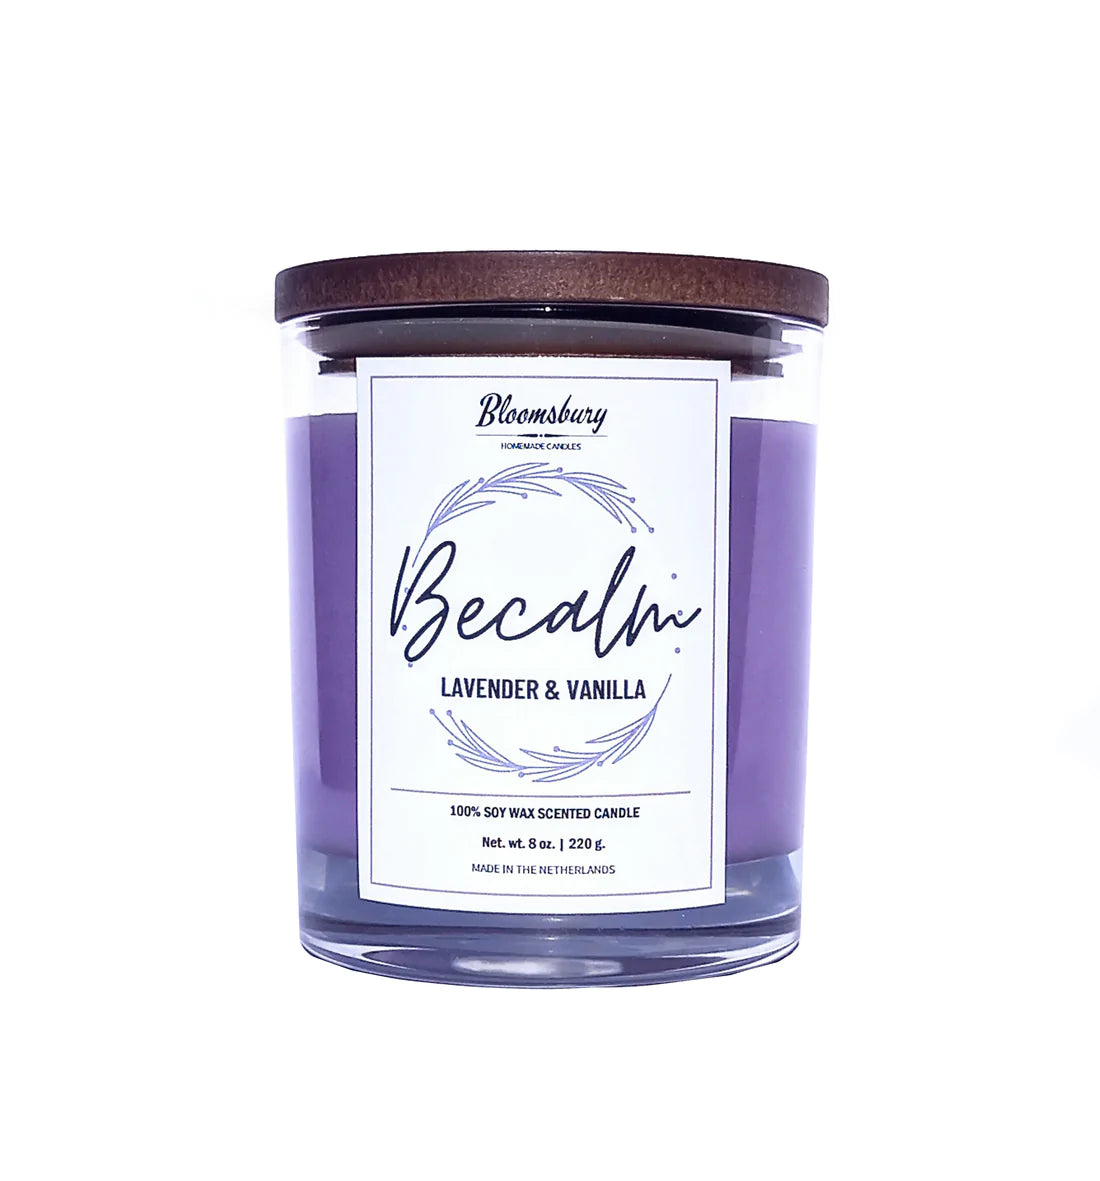 Bloomsbury Candles Becalm Scented Candle